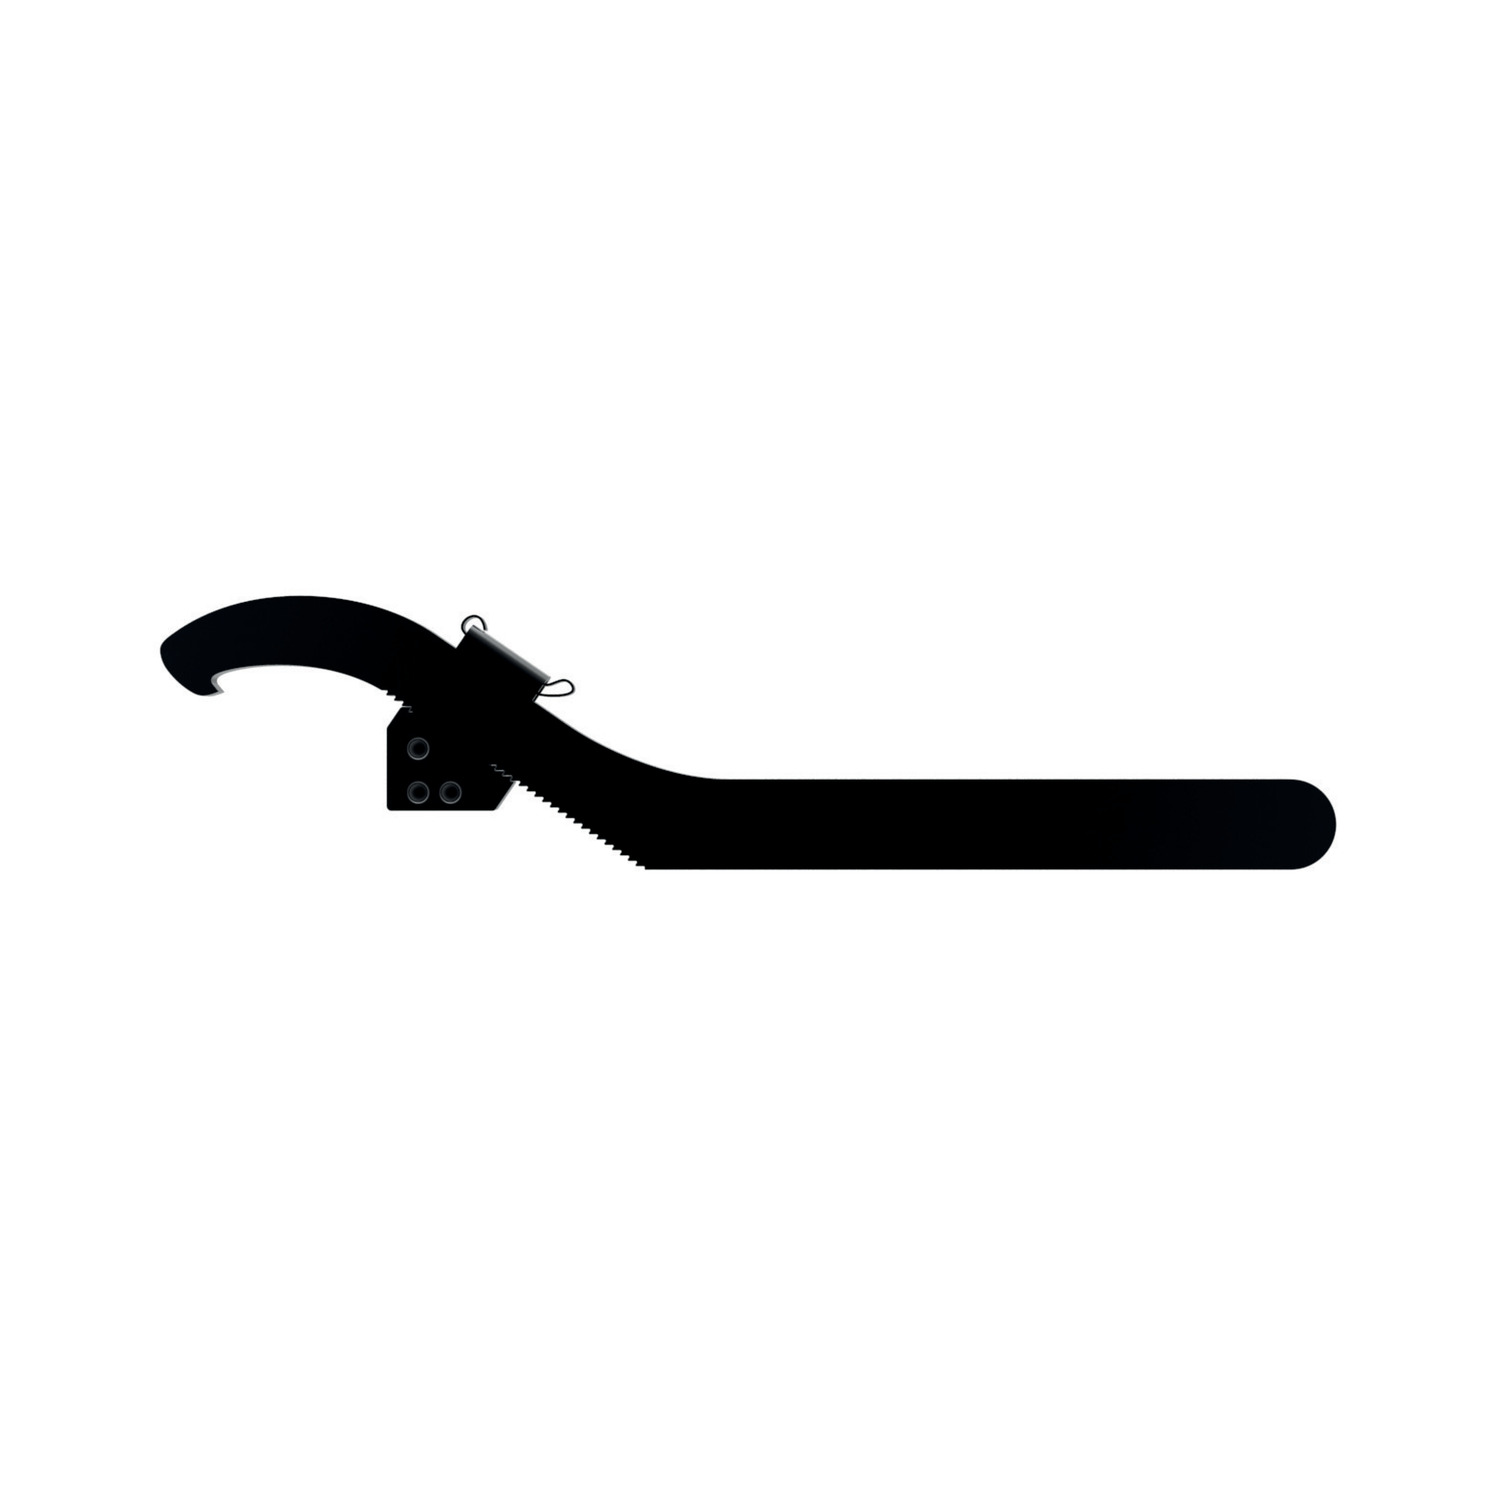 95420.W0005 Hook Spanners - Hook spring loaded adj. - 45-90 - Also known as HT0414.H0005